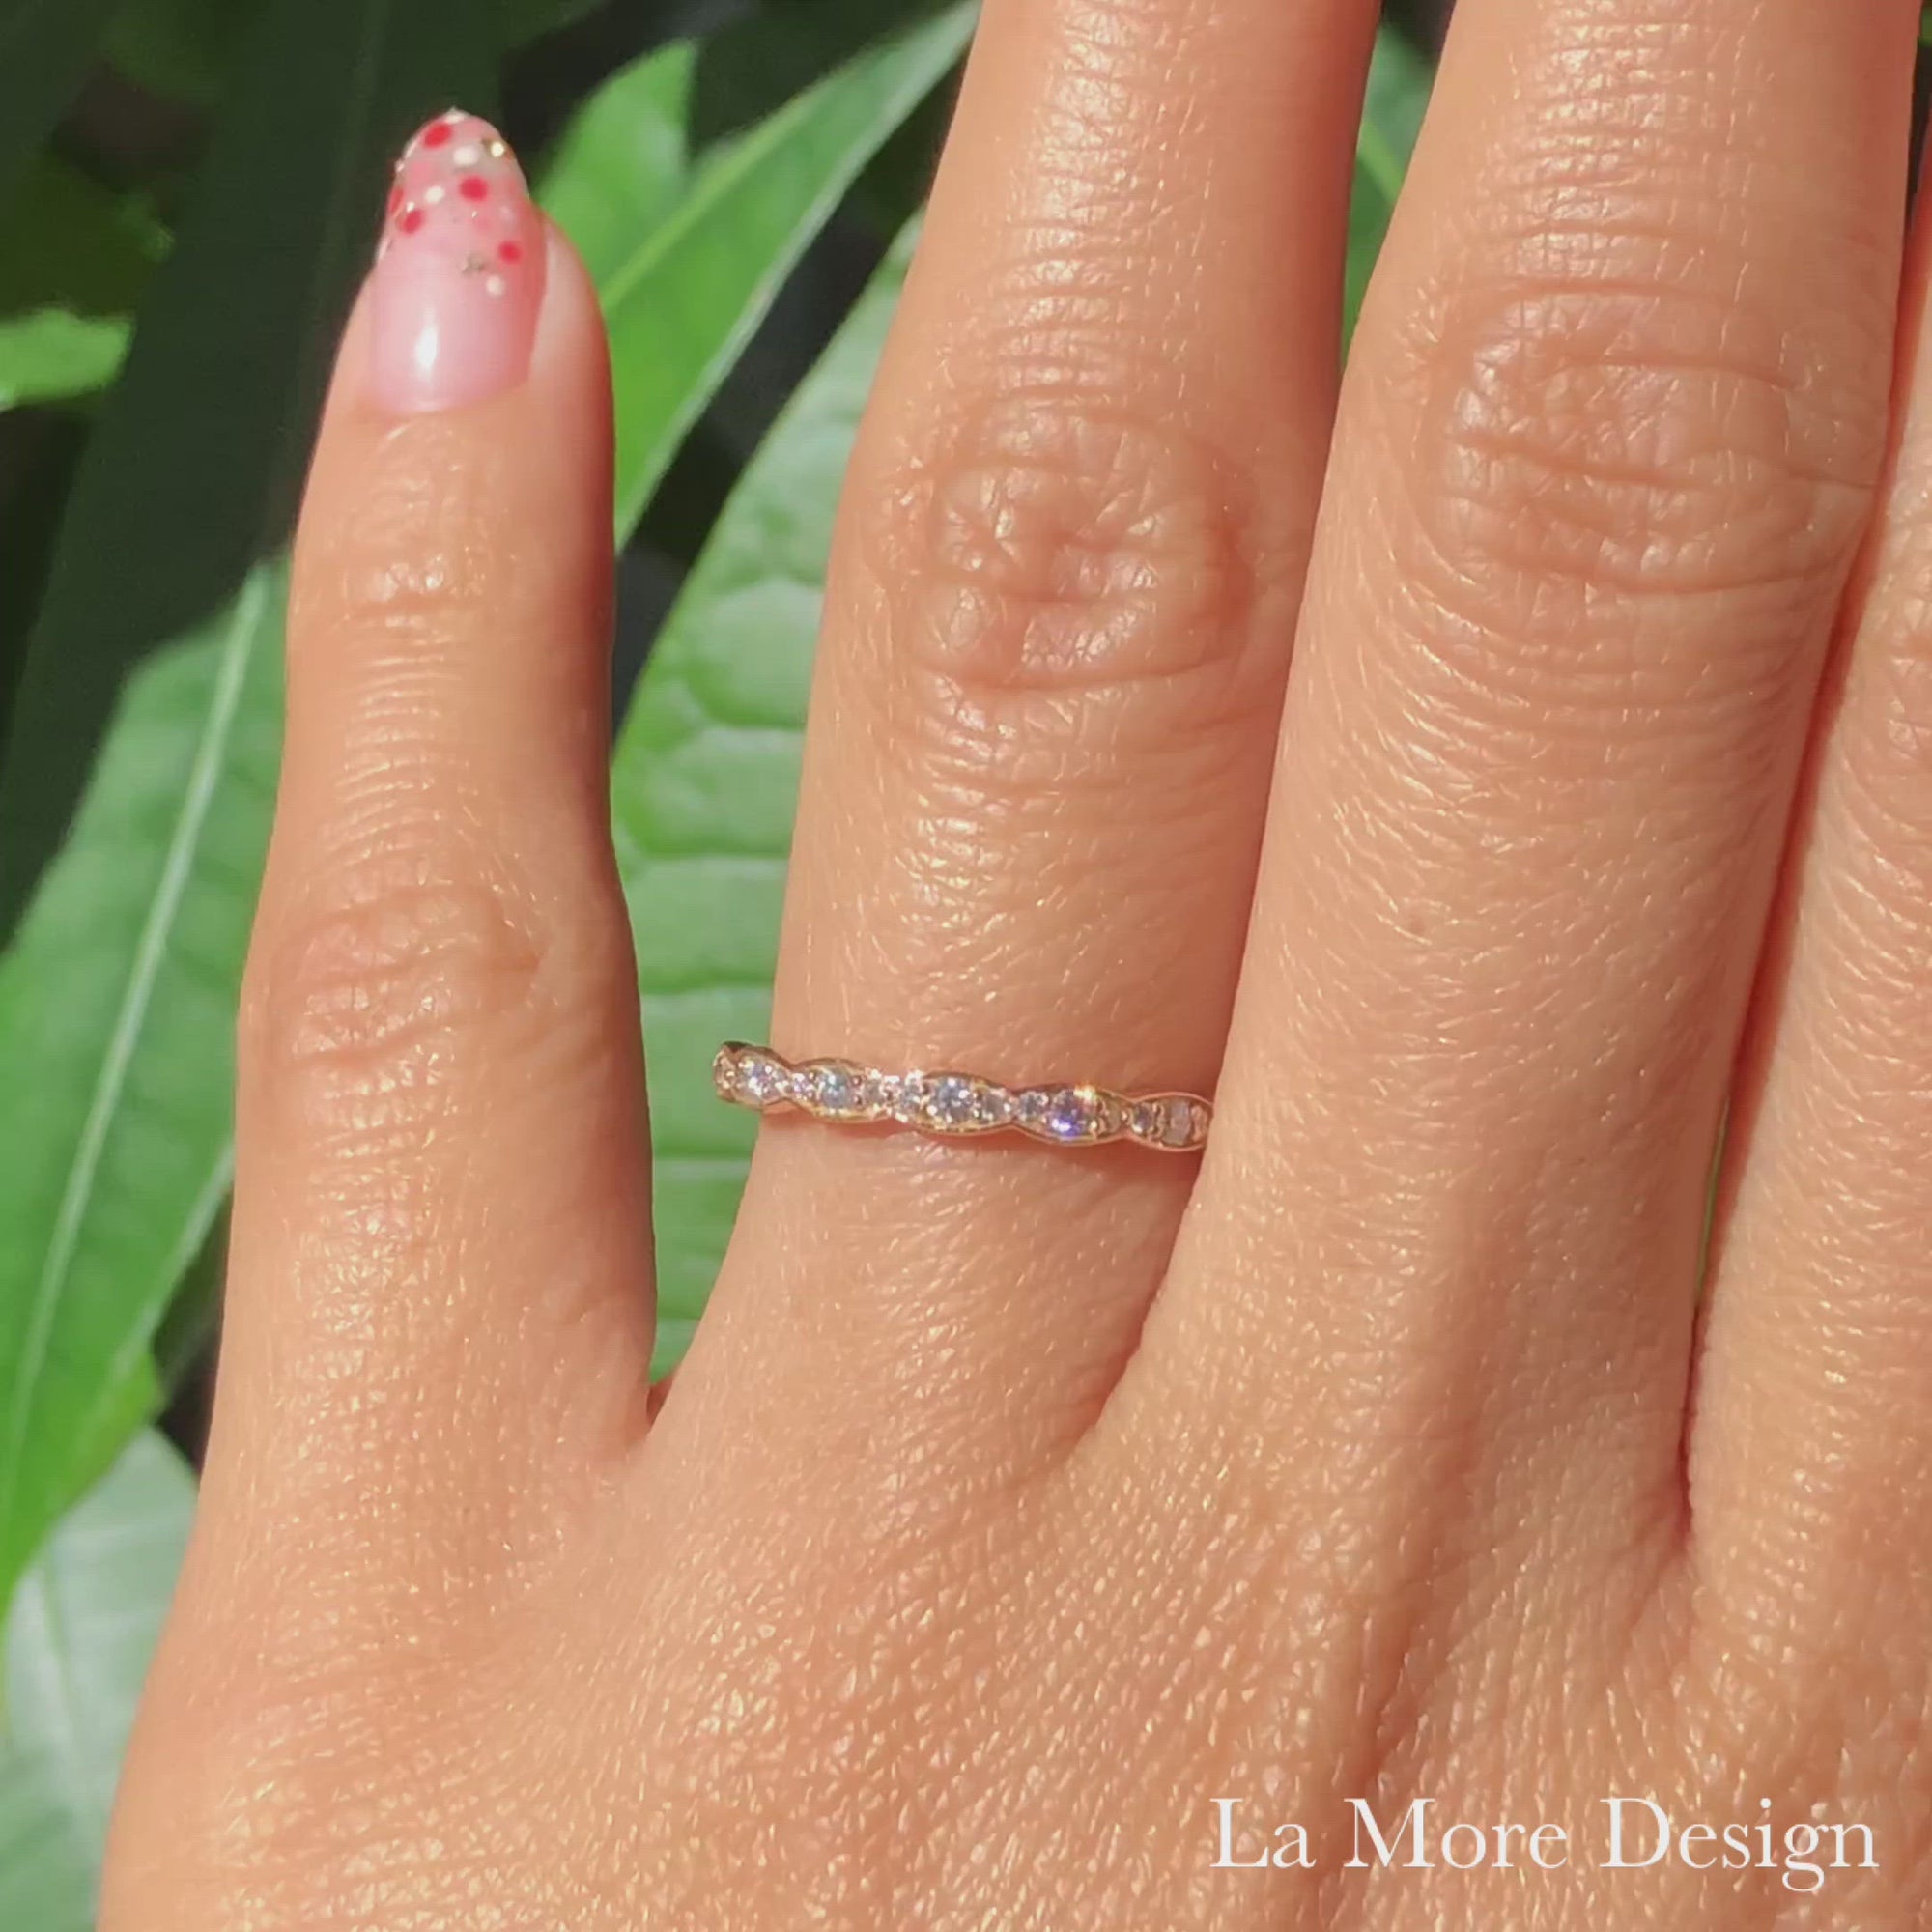 Vintage inspired diamond wedding ring is crafted in 14k rose gold scalloped band studded with brilliant round cut diamonds. This elegant scalloped diamond ring is perfect as a matching wedding band with our vintage floral engagement rings or it can stack up with your other rings.